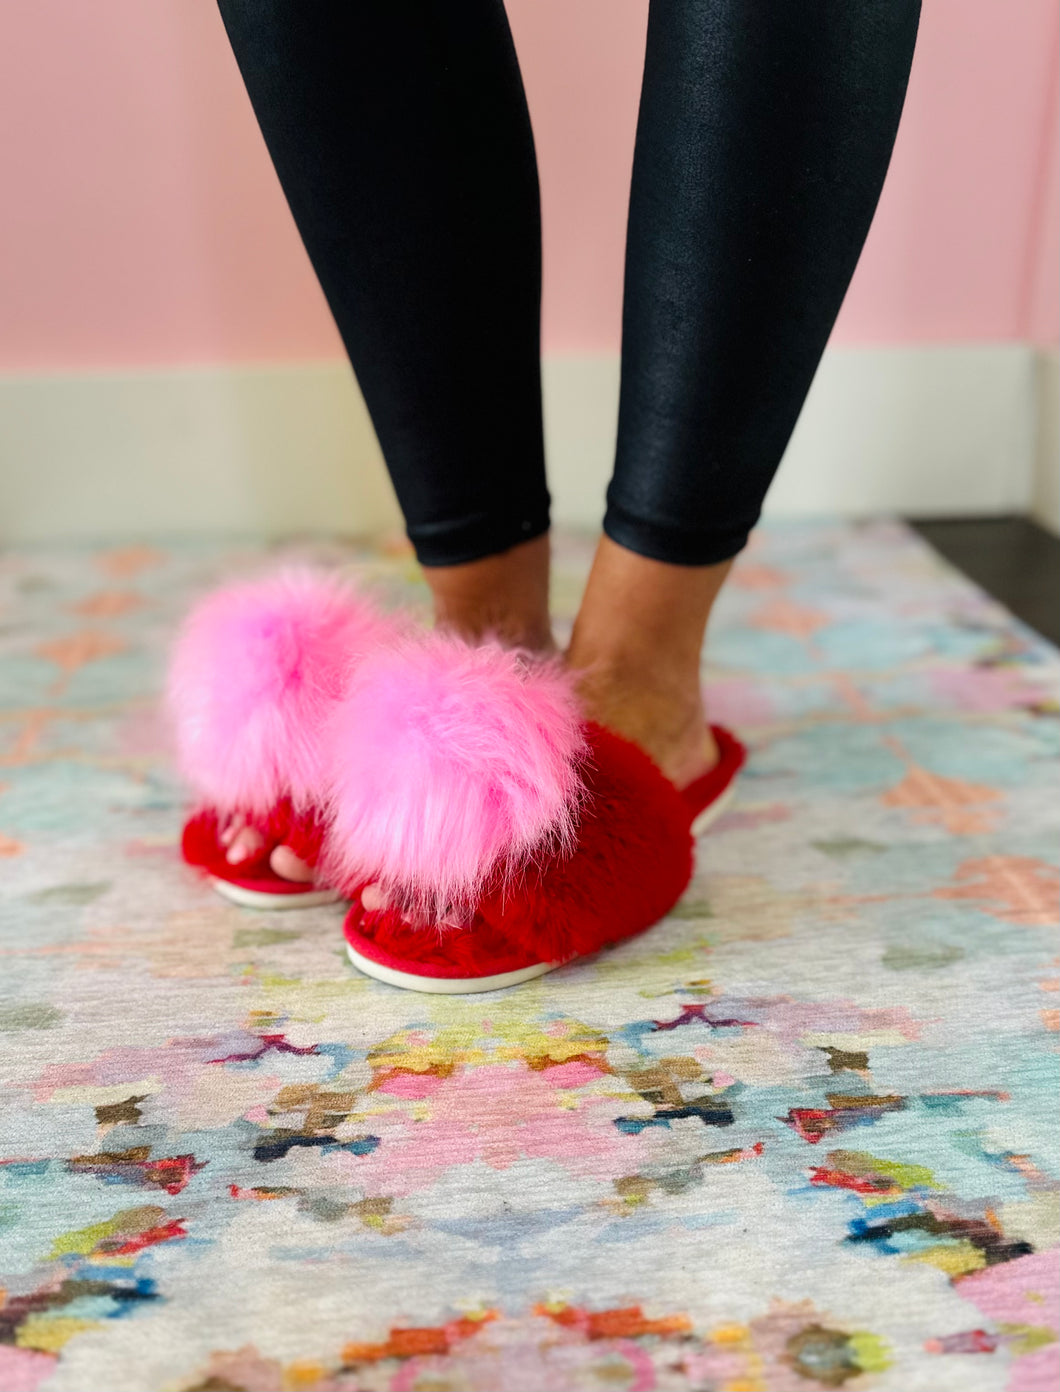 The Red Pom Slipper Shoes